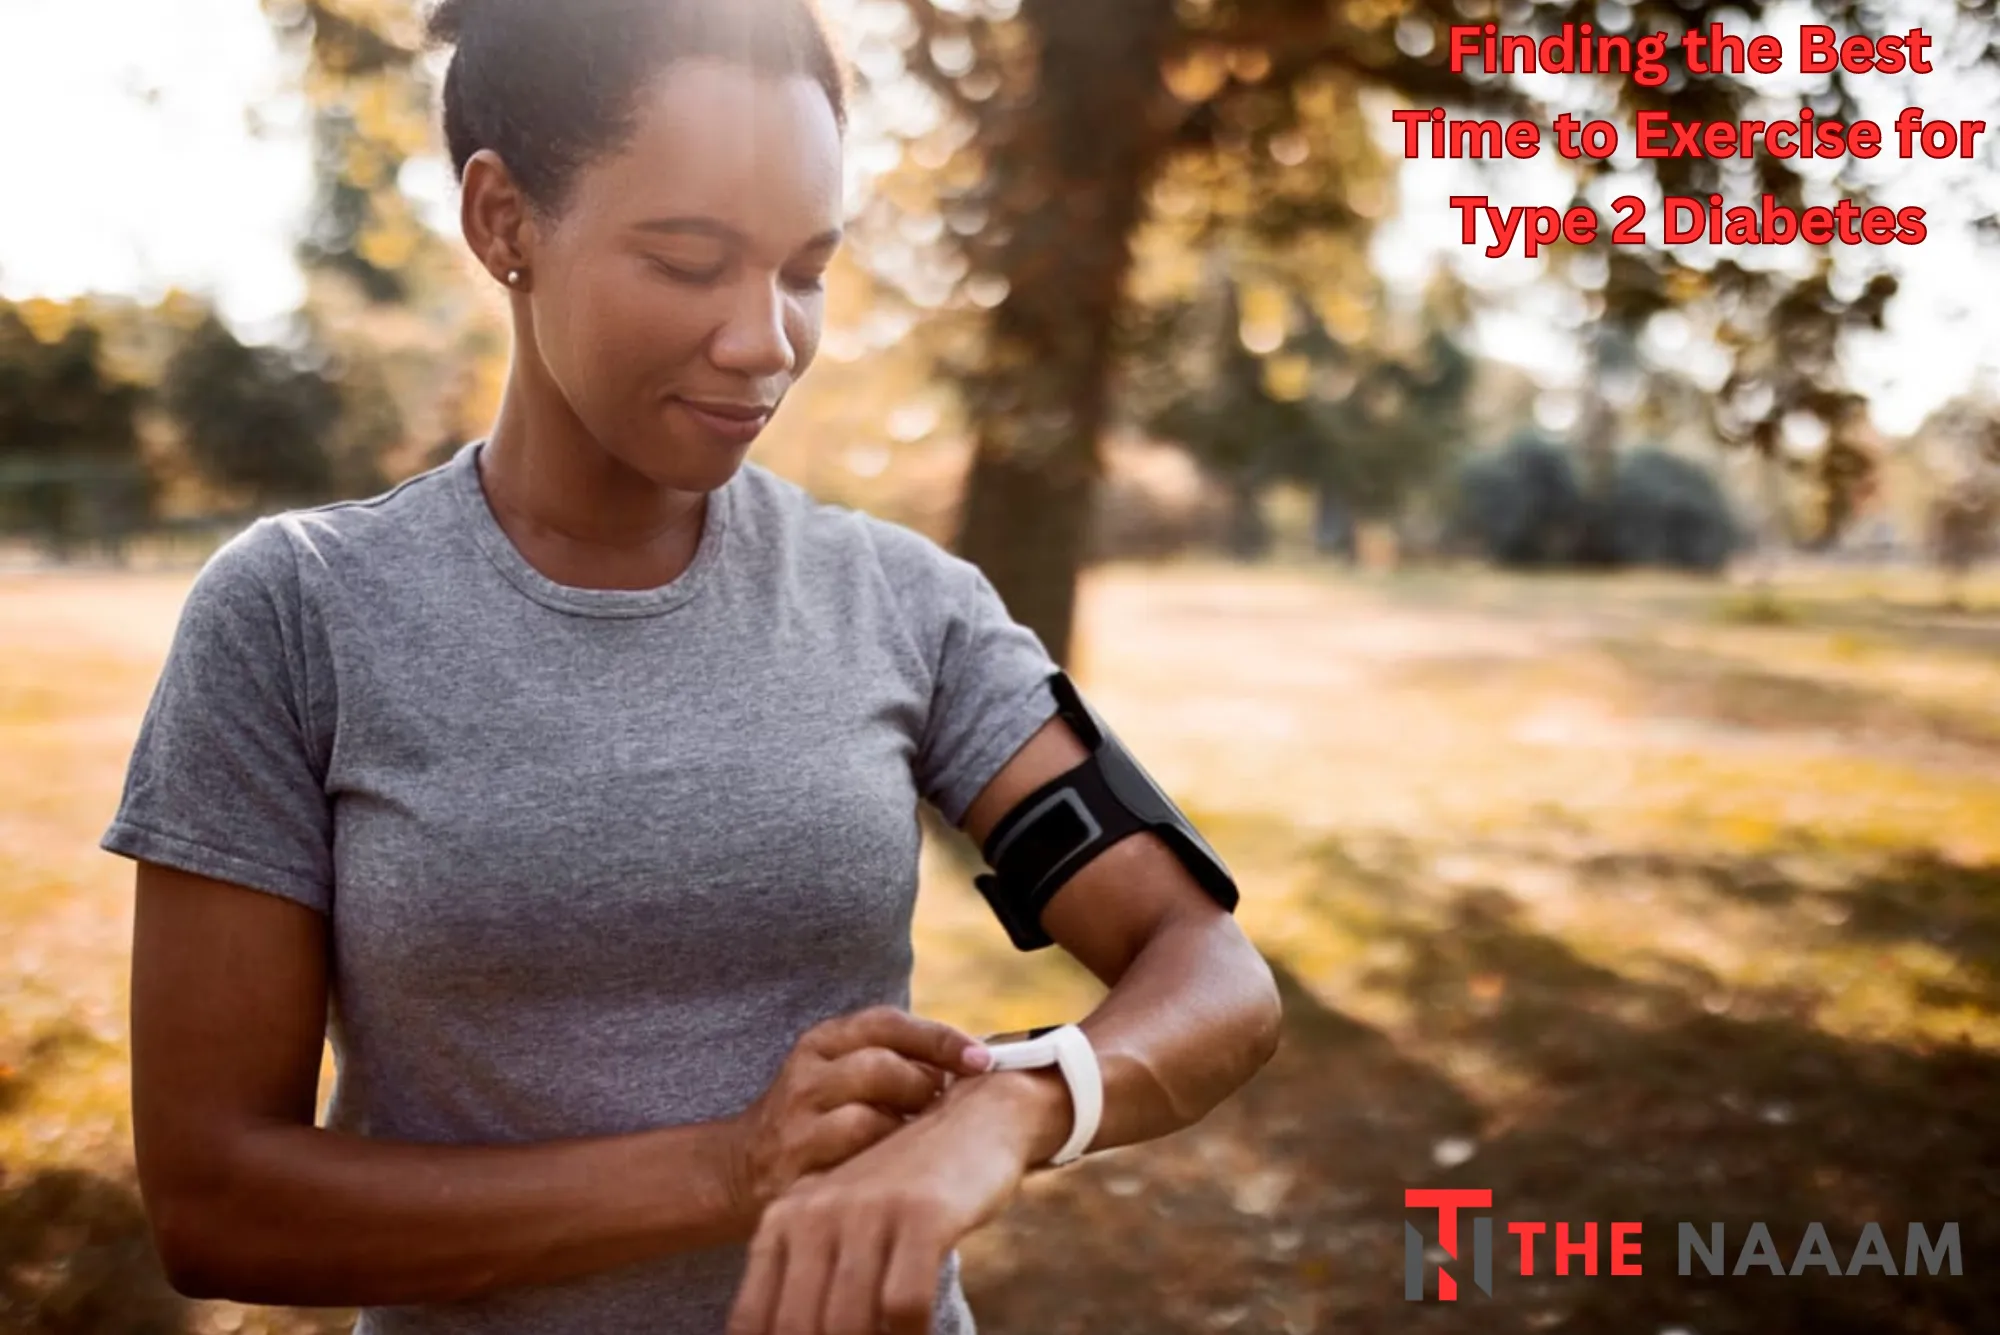 Finding the Best Time to Exercise for Type 2 Diabetes